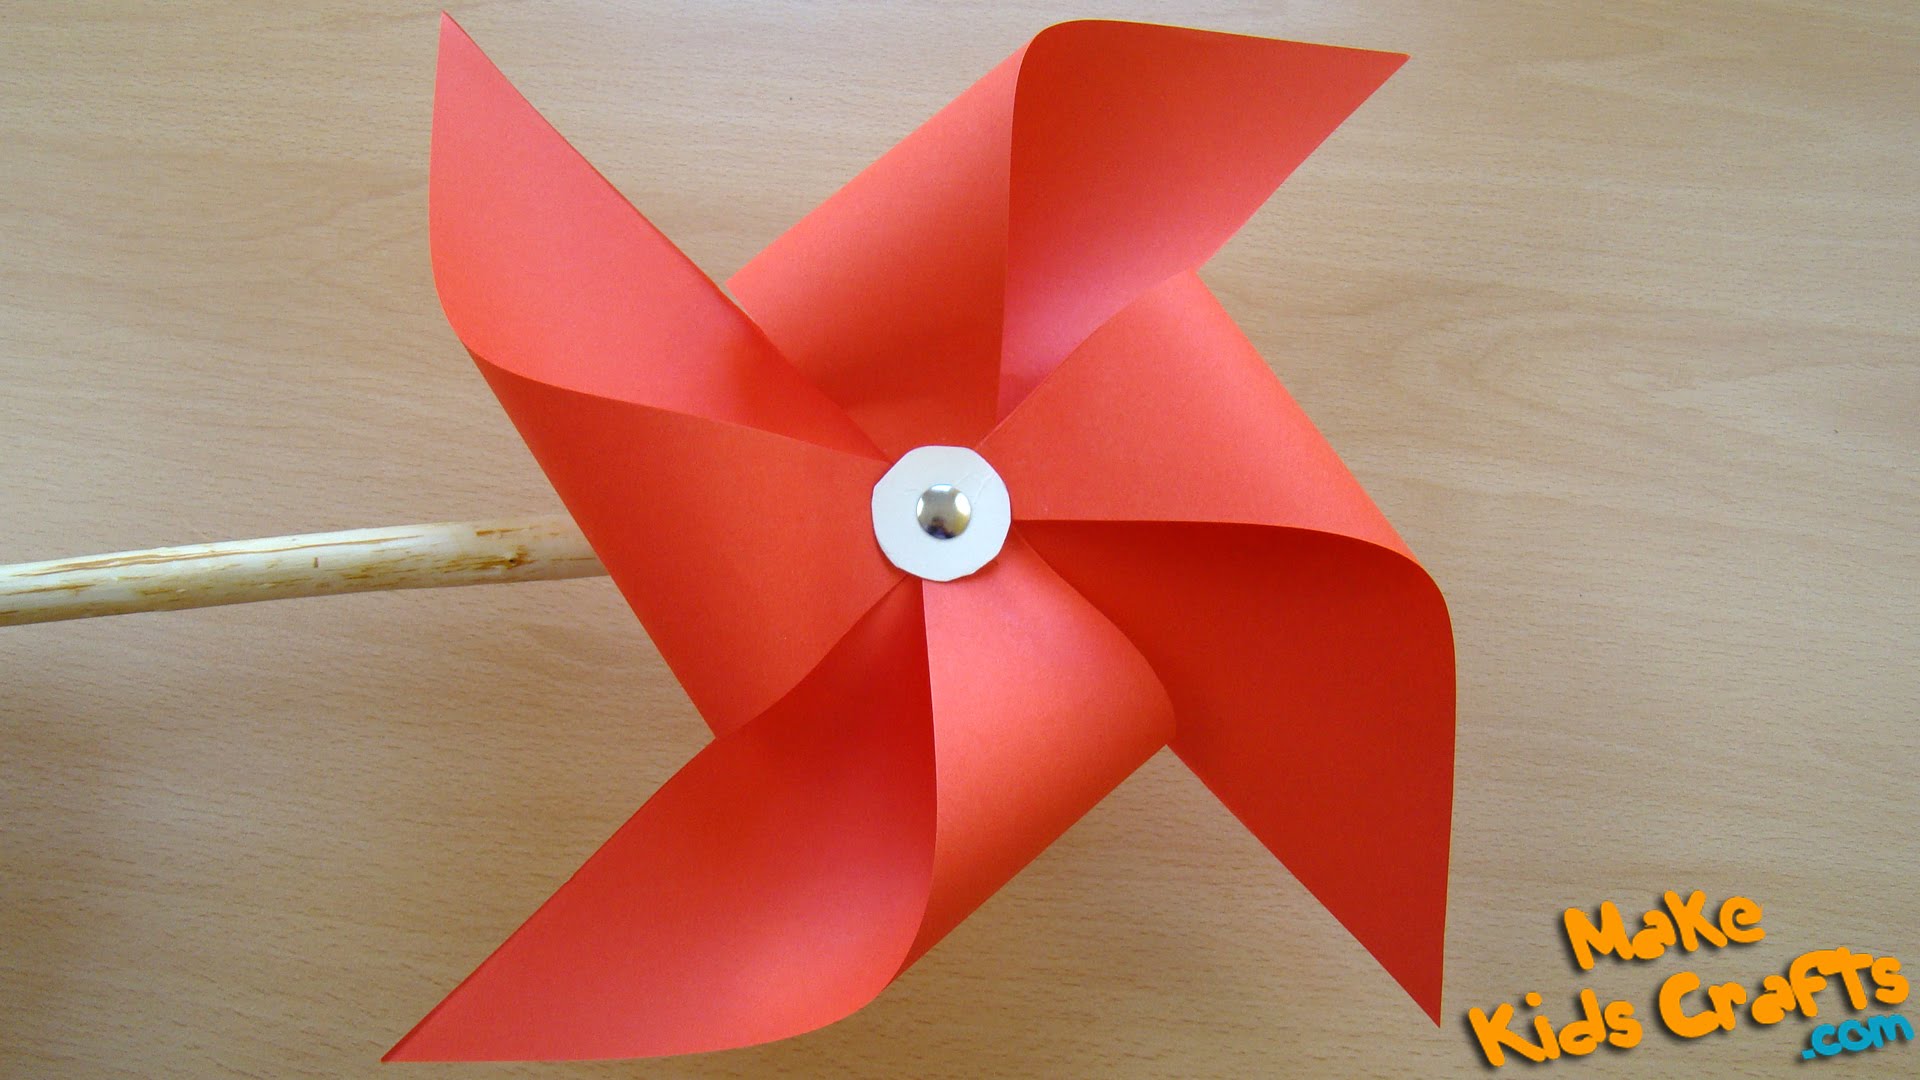 How to make a pinwheel that spins? DIY - YouTube